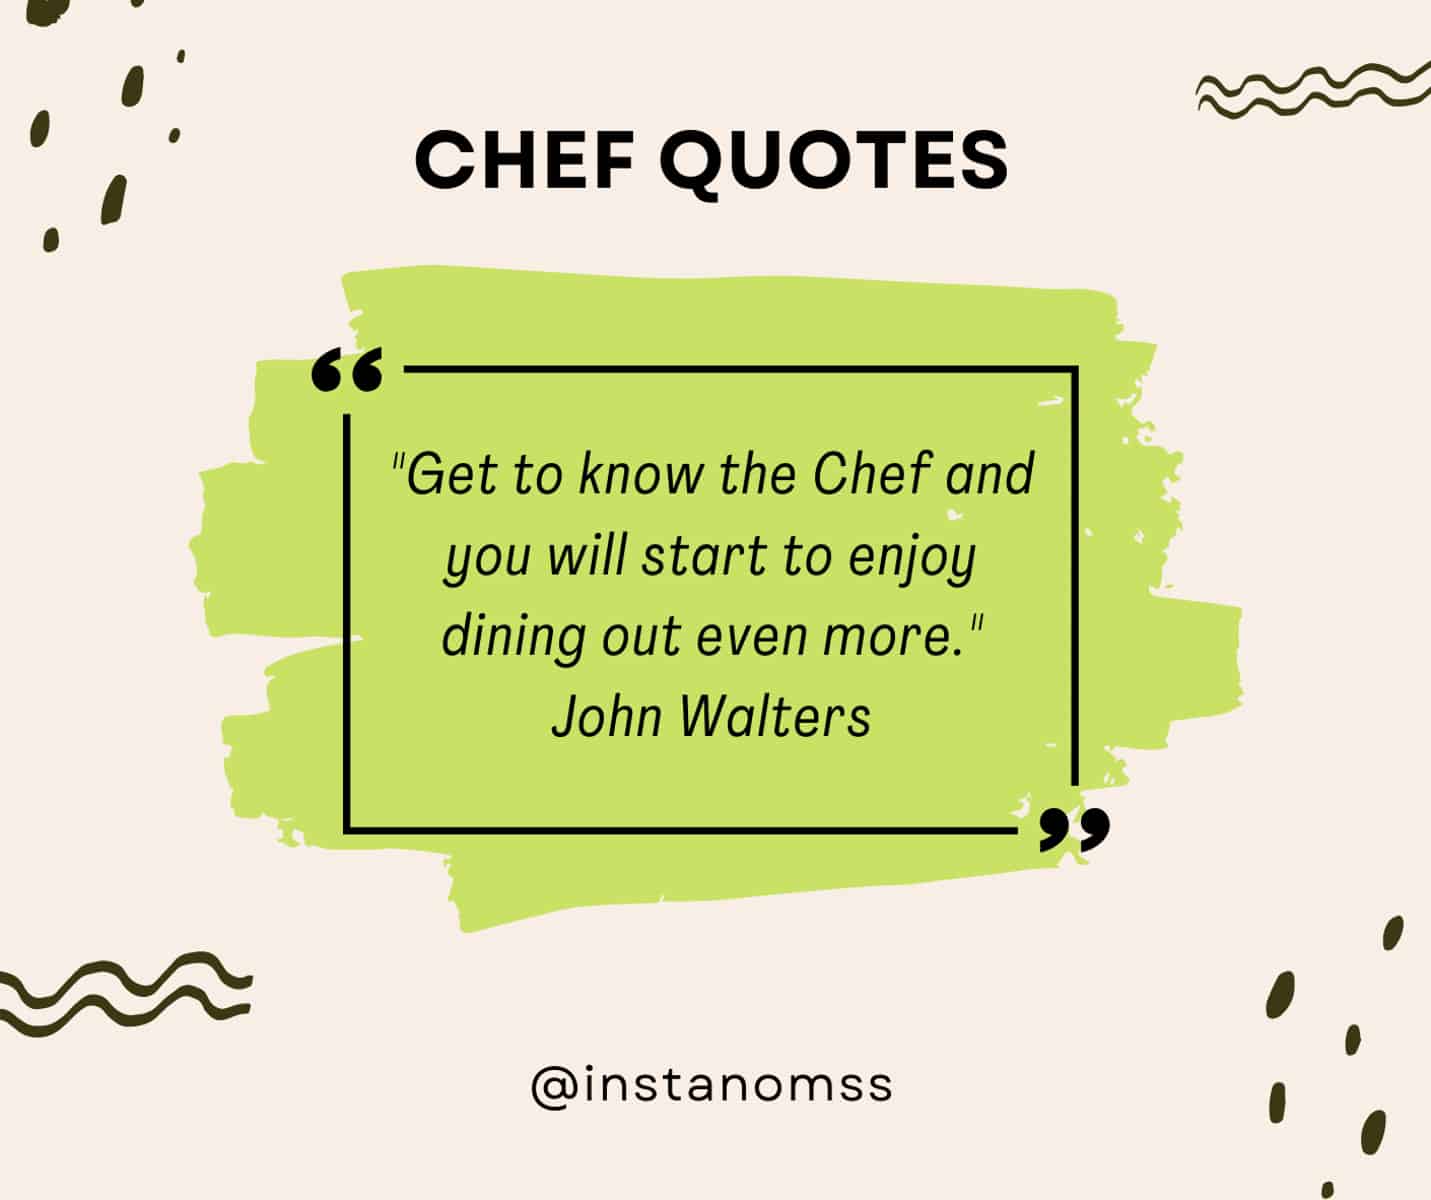 "Get to know the Chef and you will start to enjoy dining out even more." John Walters